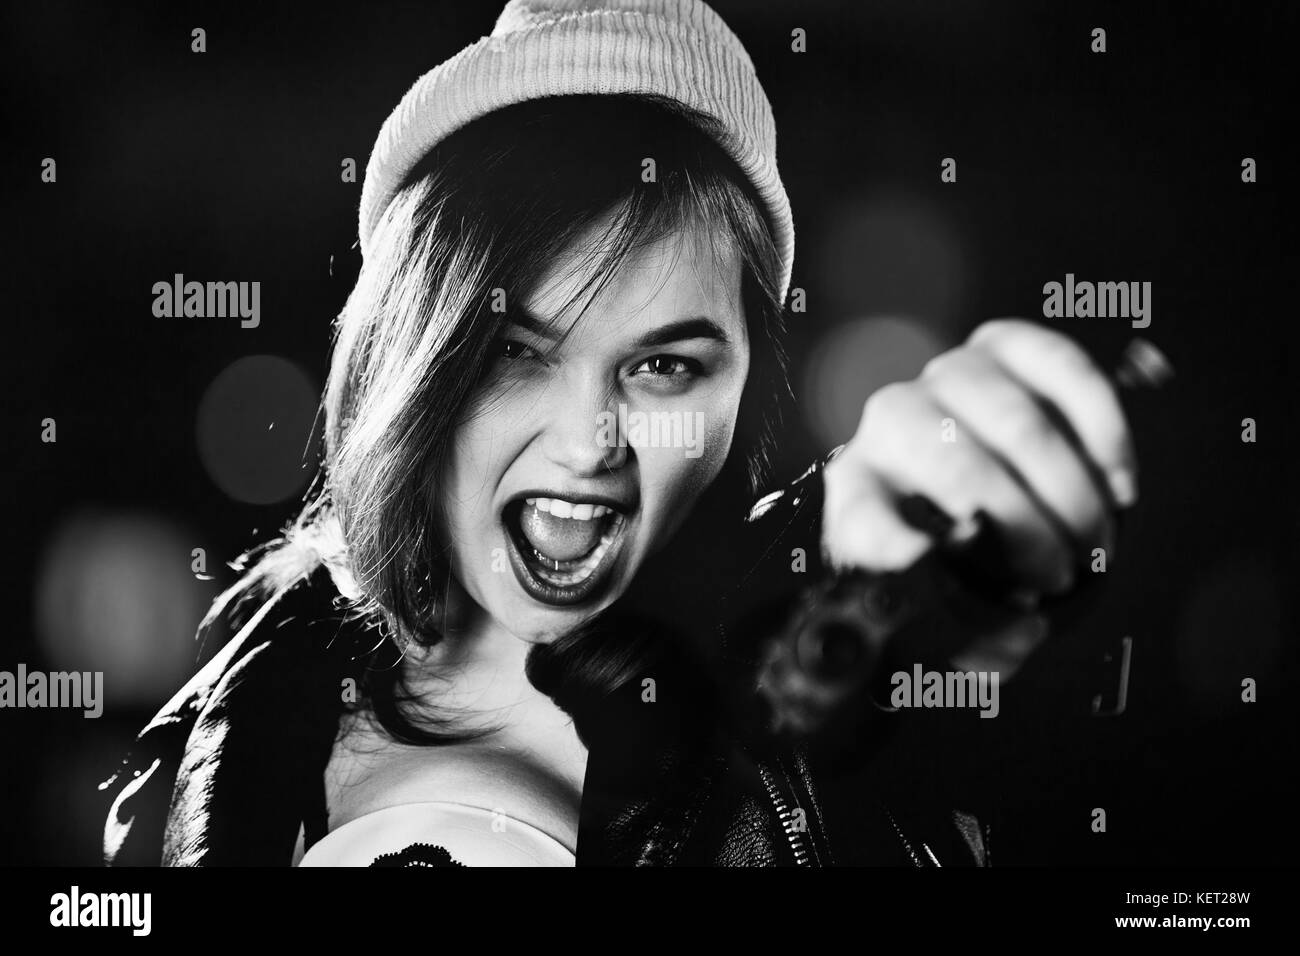 serious girl with gun on blurred background aiming at camera, screaming, monochrome Stock Photo